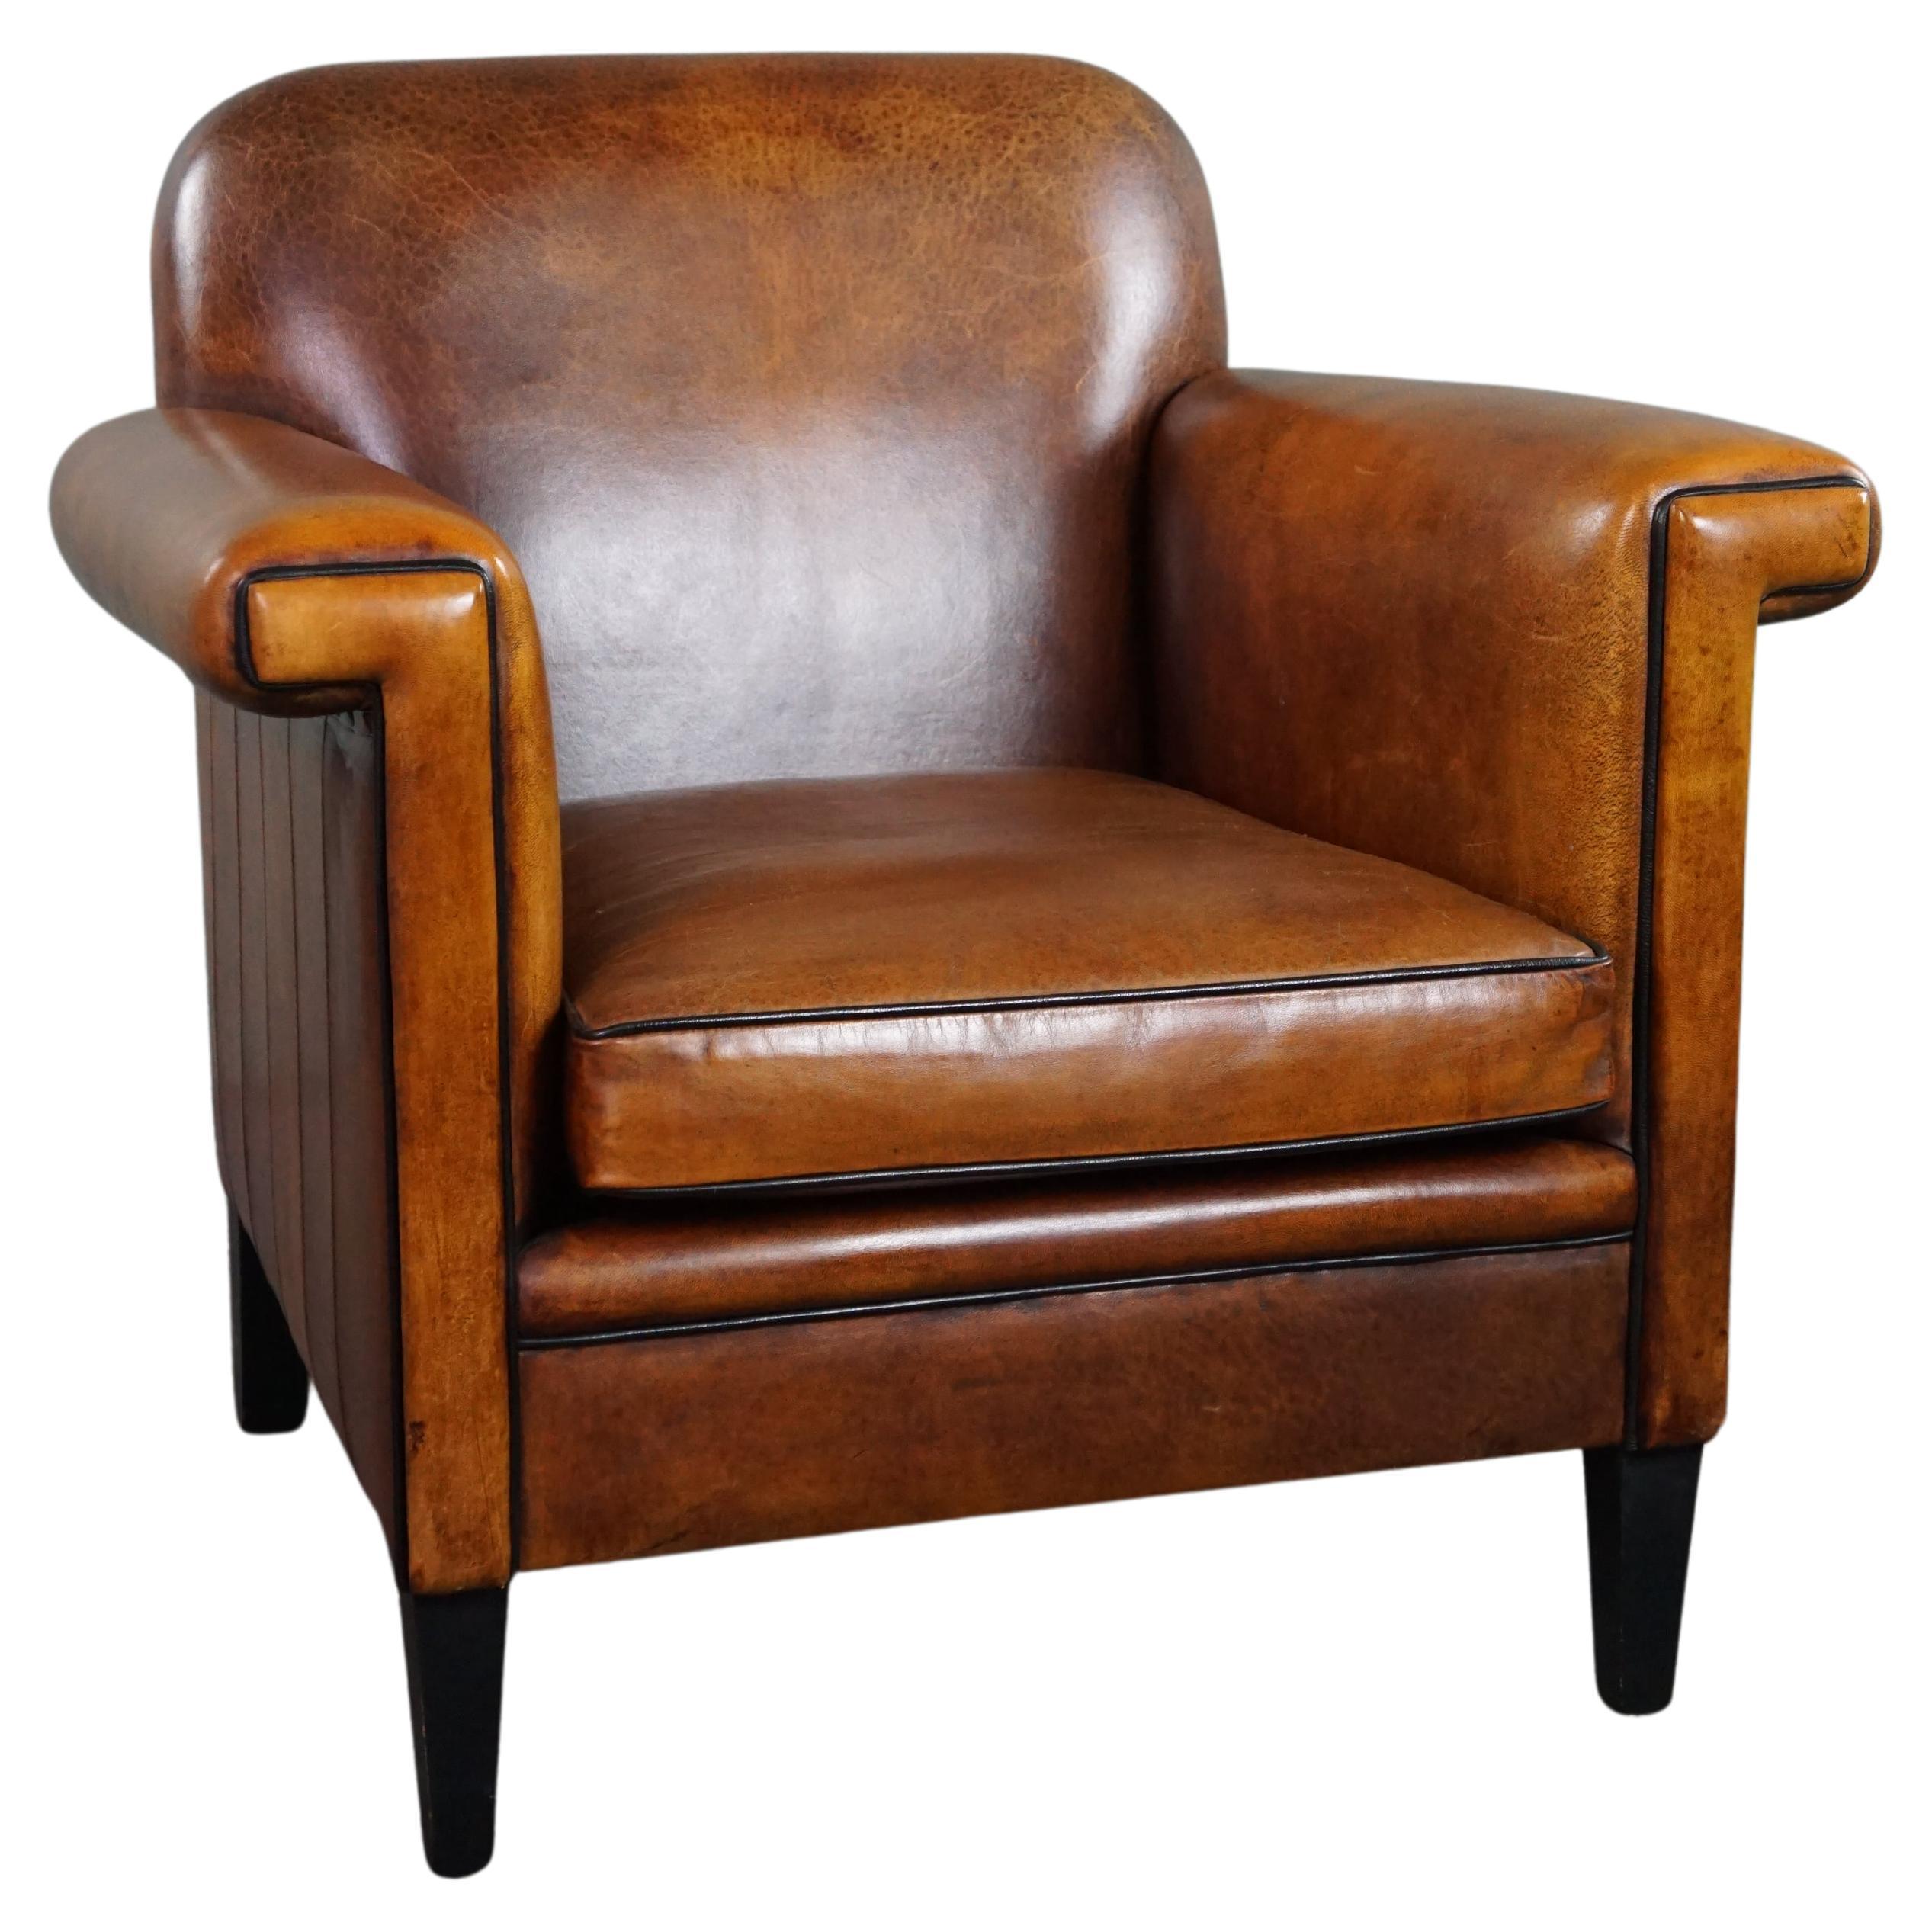 Sheepskin Art Deco design armchair with accents all around For Sale